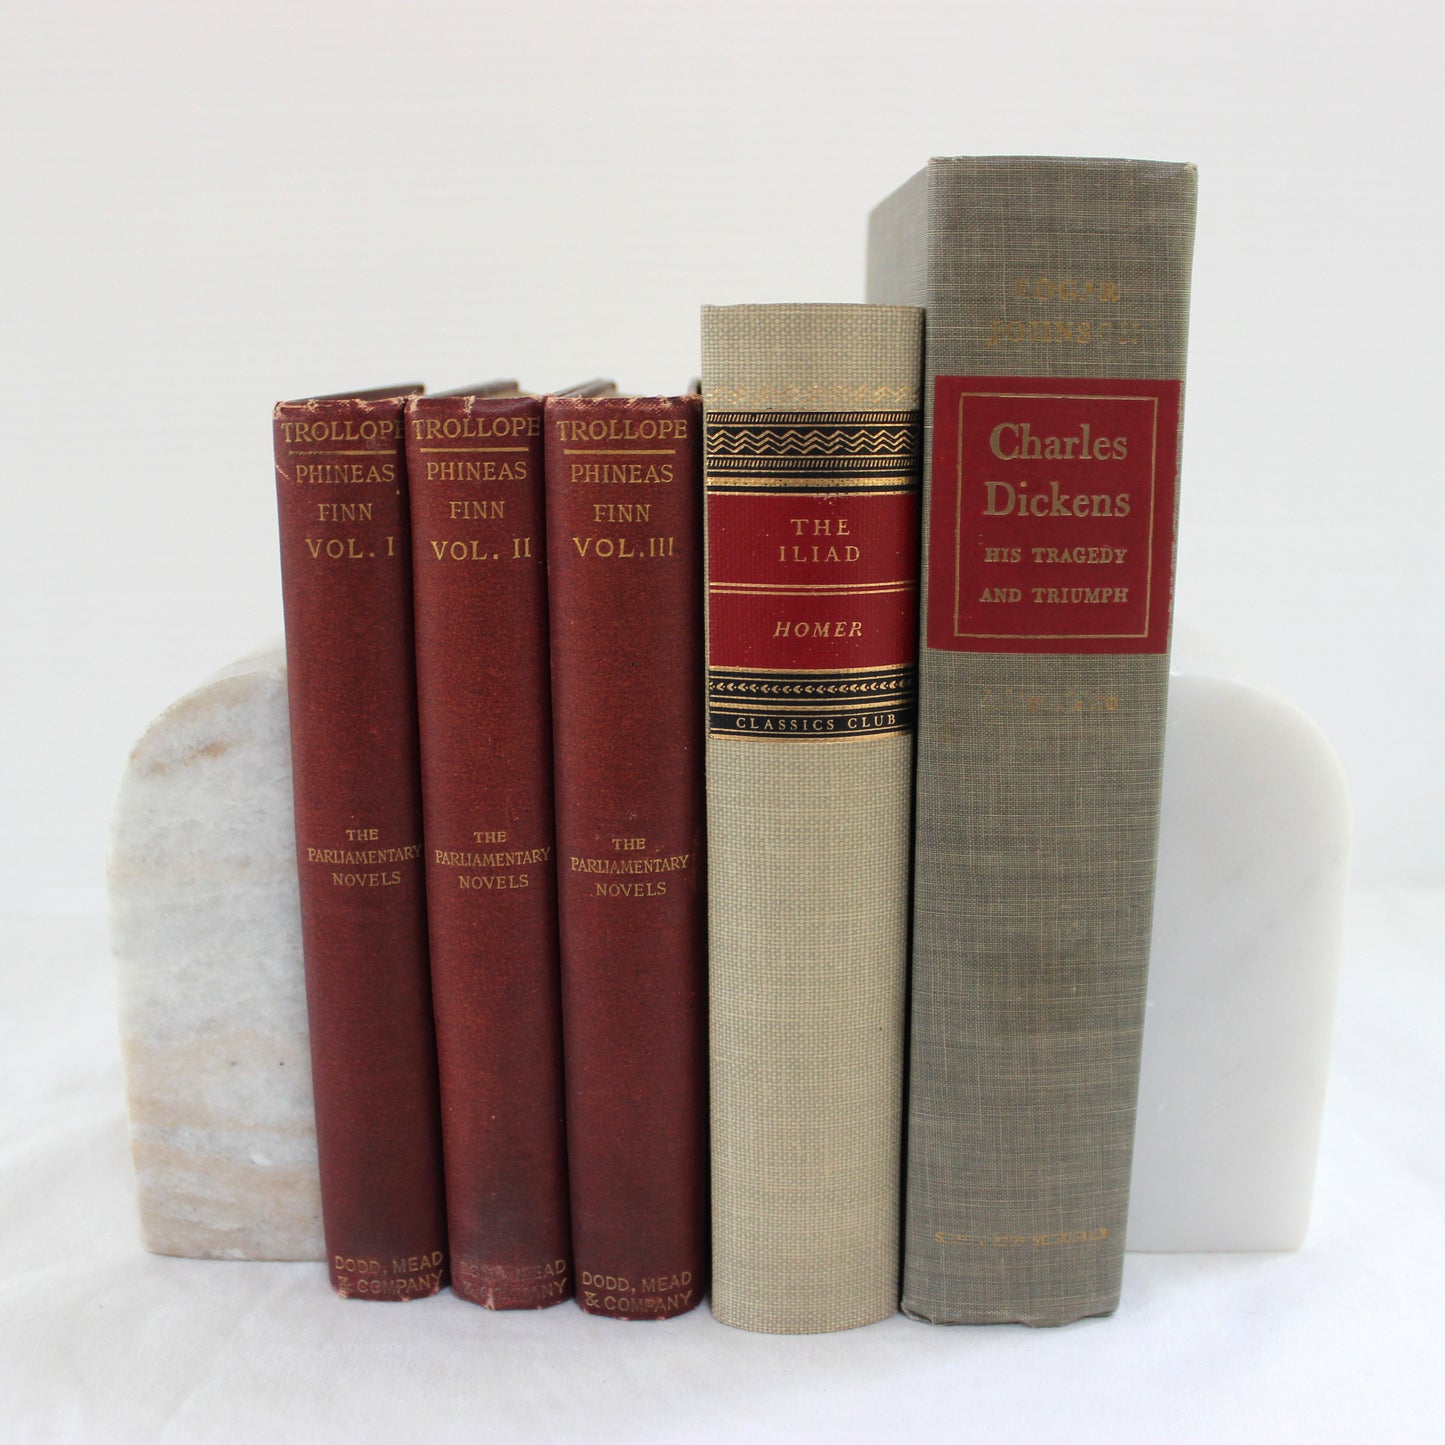 Classic Red Vintage Books (Set of 5)